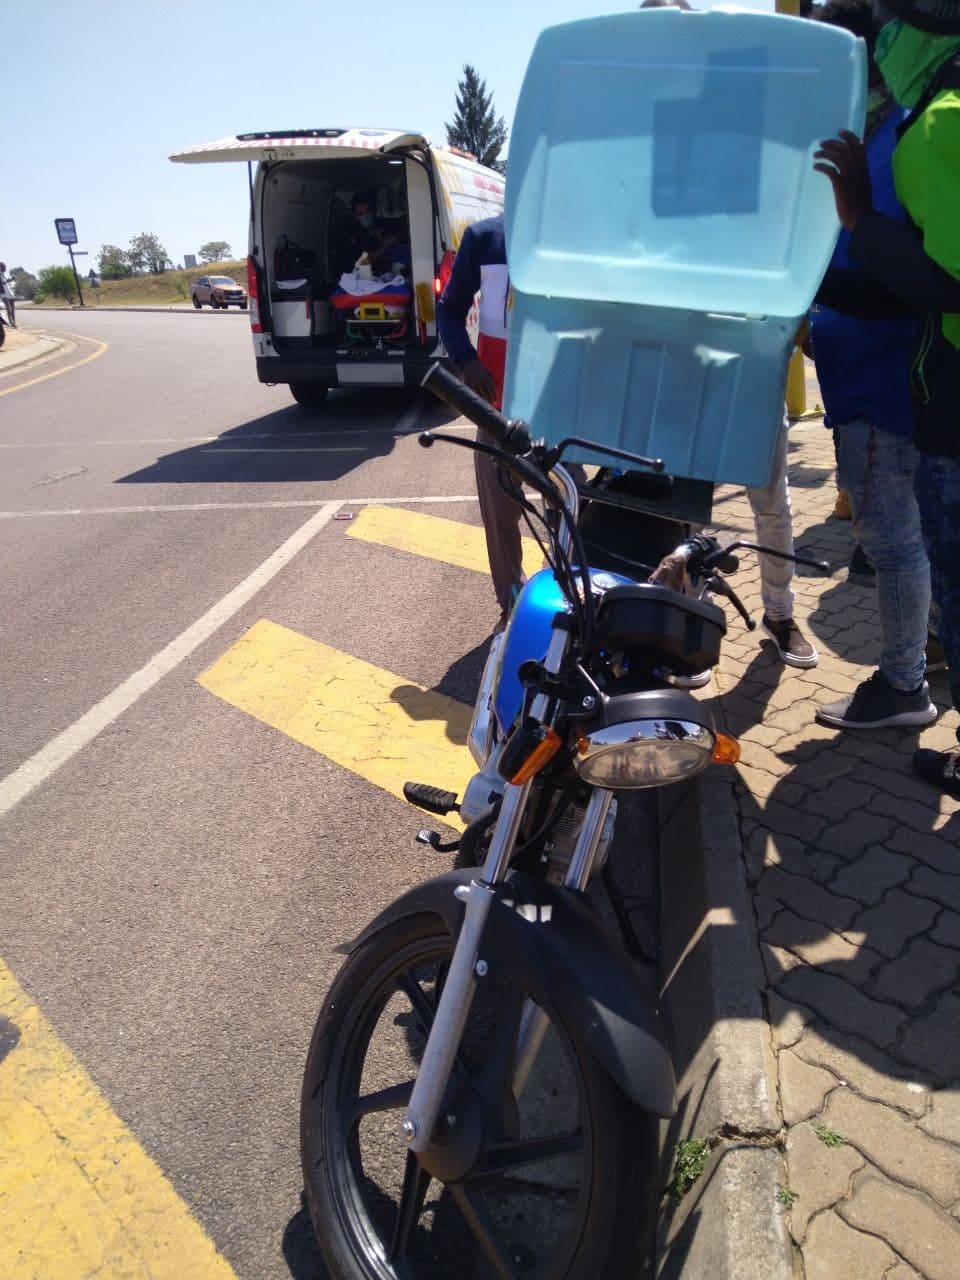 Delivery motorcyclist seriously injured in Kyalami collision